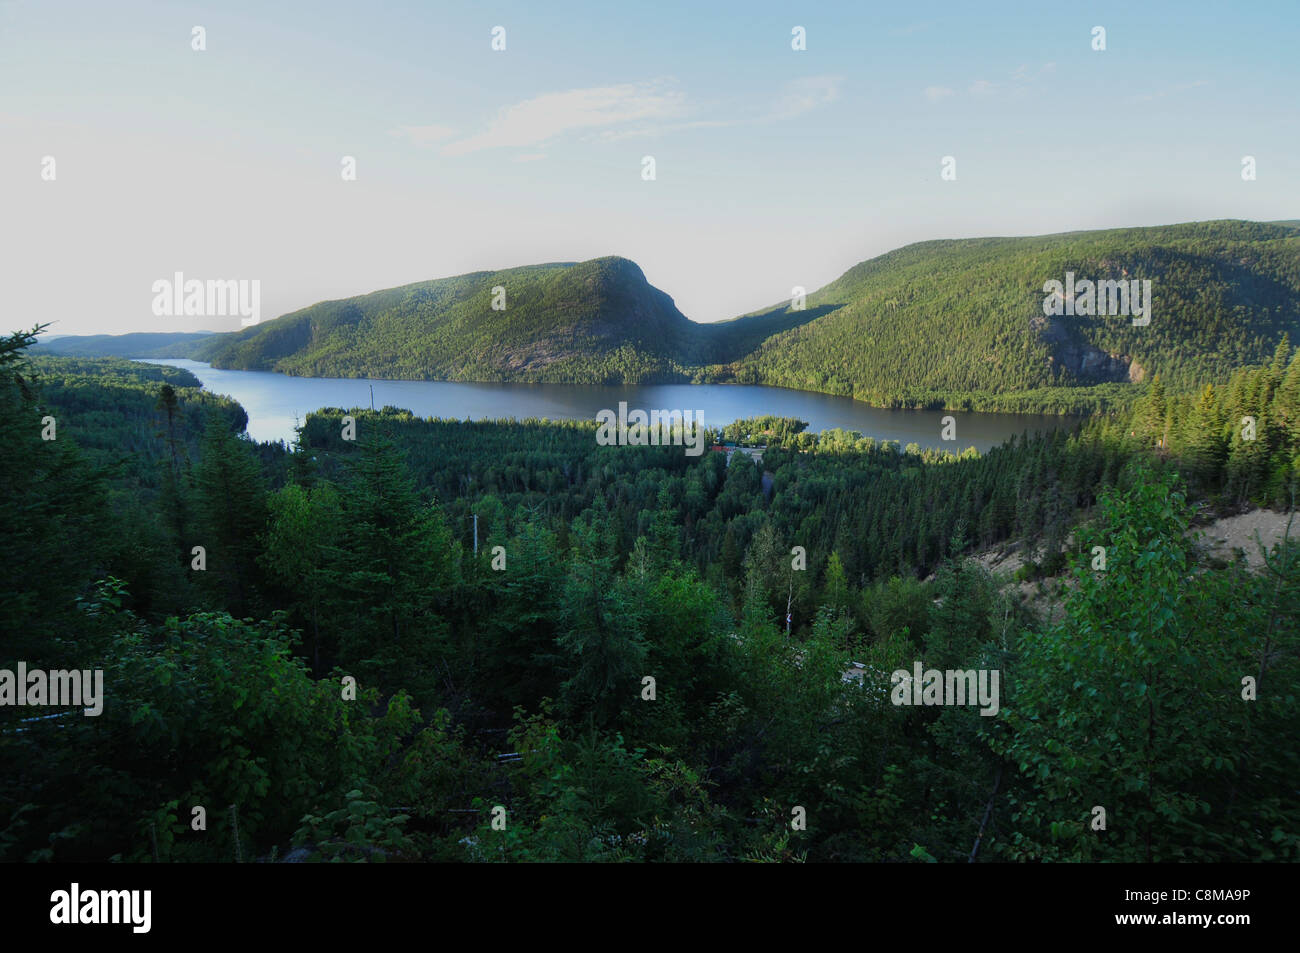 A picturesque setting on Lake Saguenay of Quebec, Canada. Stock Photo